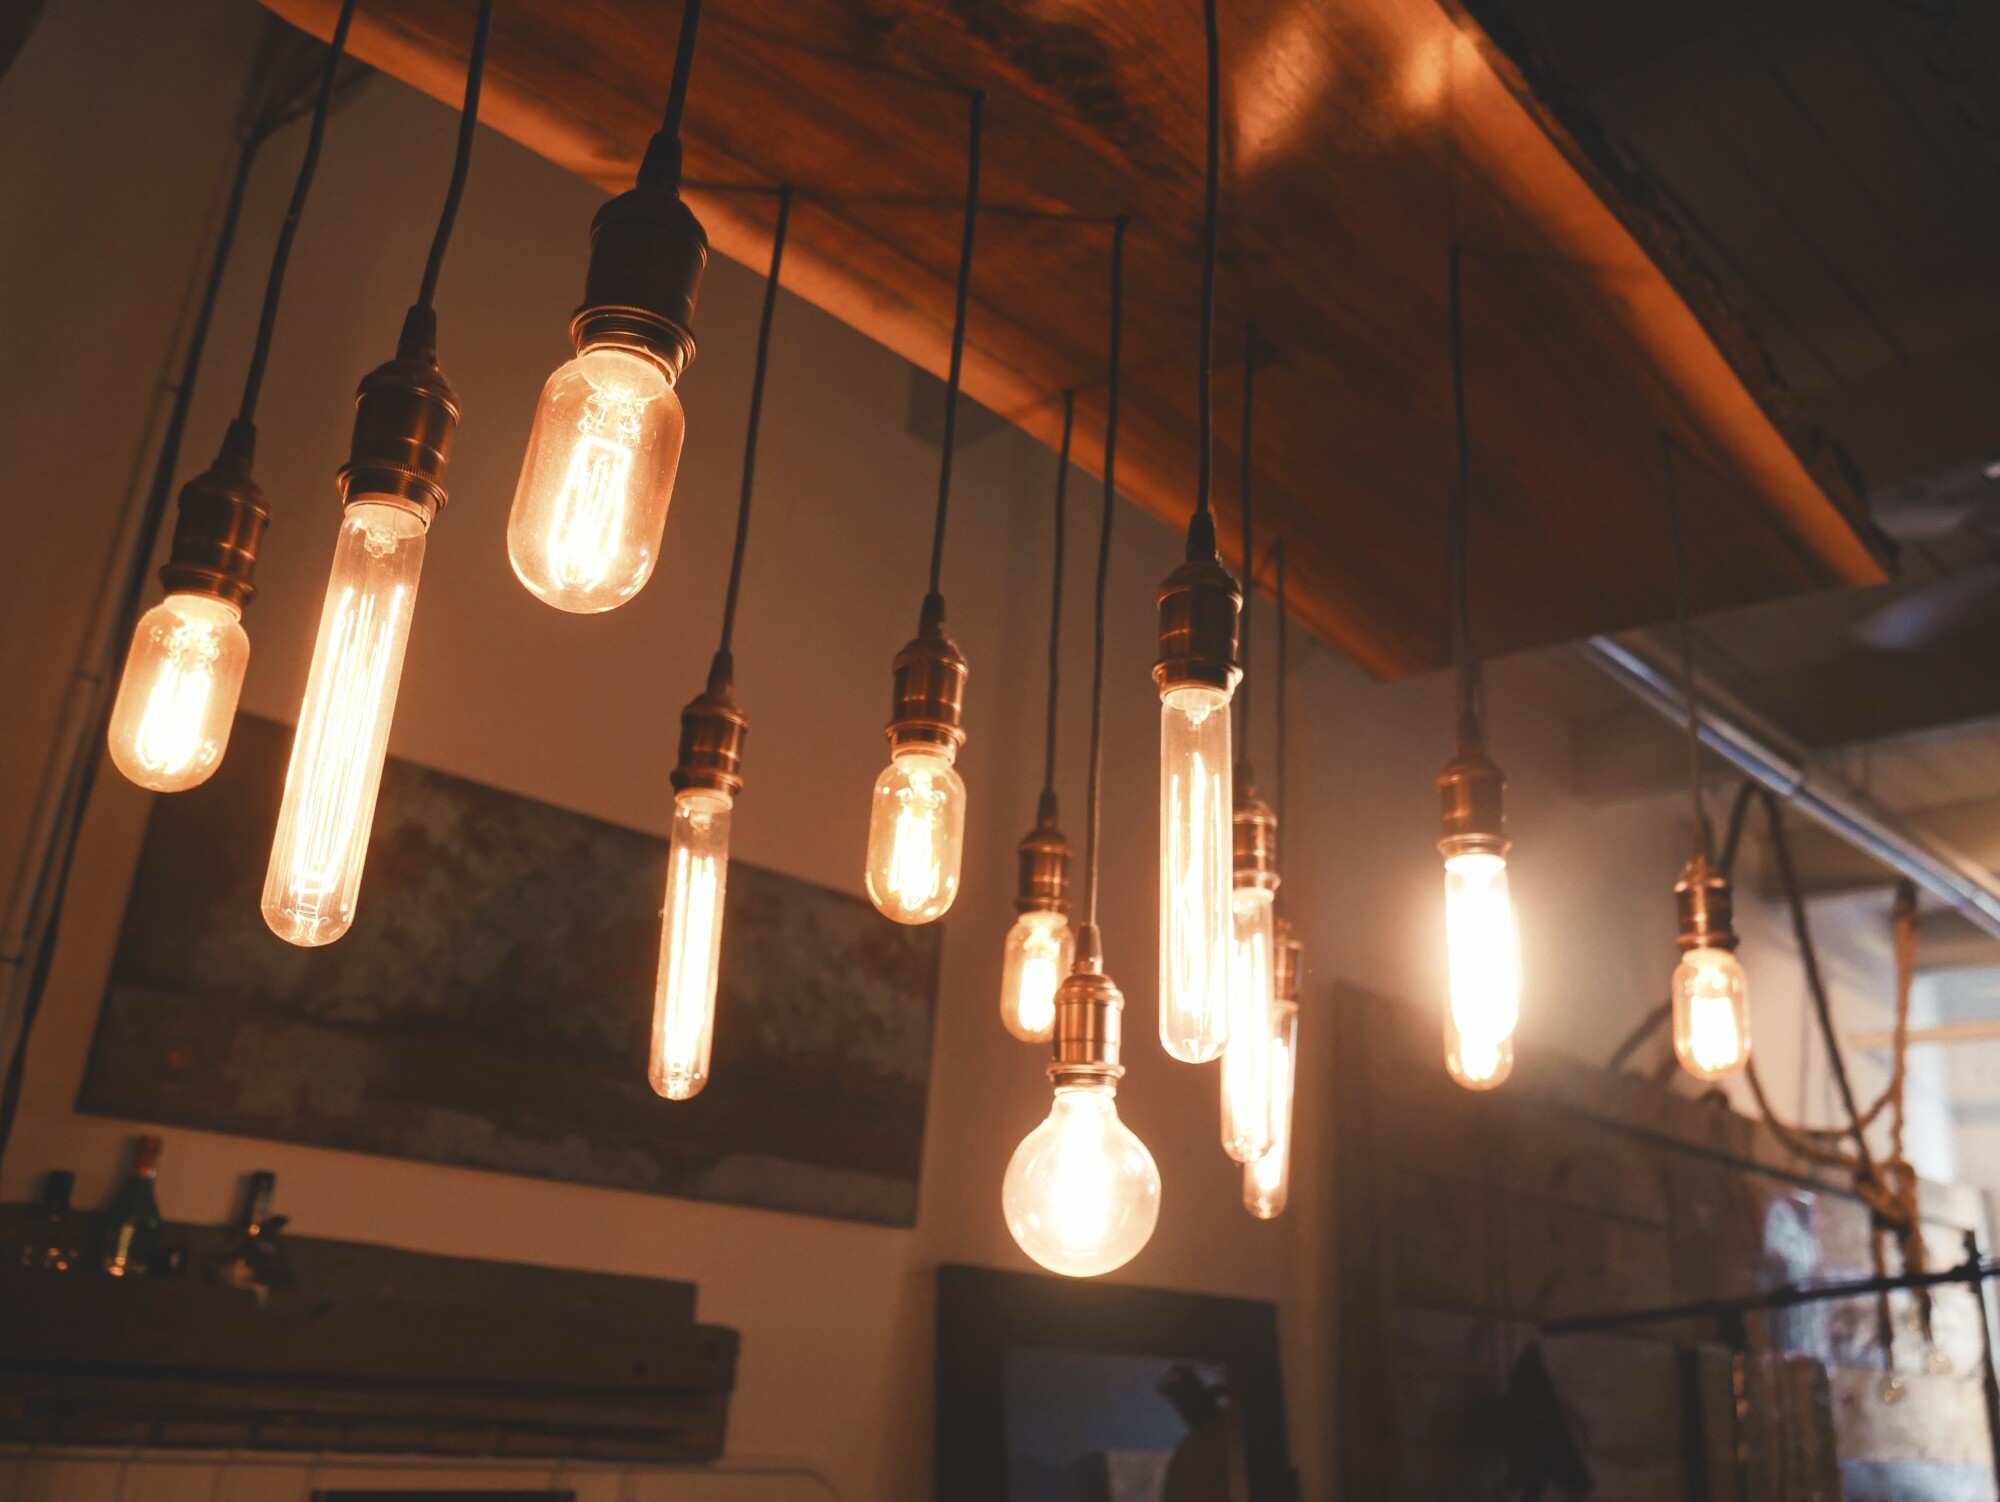 Interior lighting plays a large part in mood and wellness within the home. See our guide about how to choose the right interior lighting for your home today.